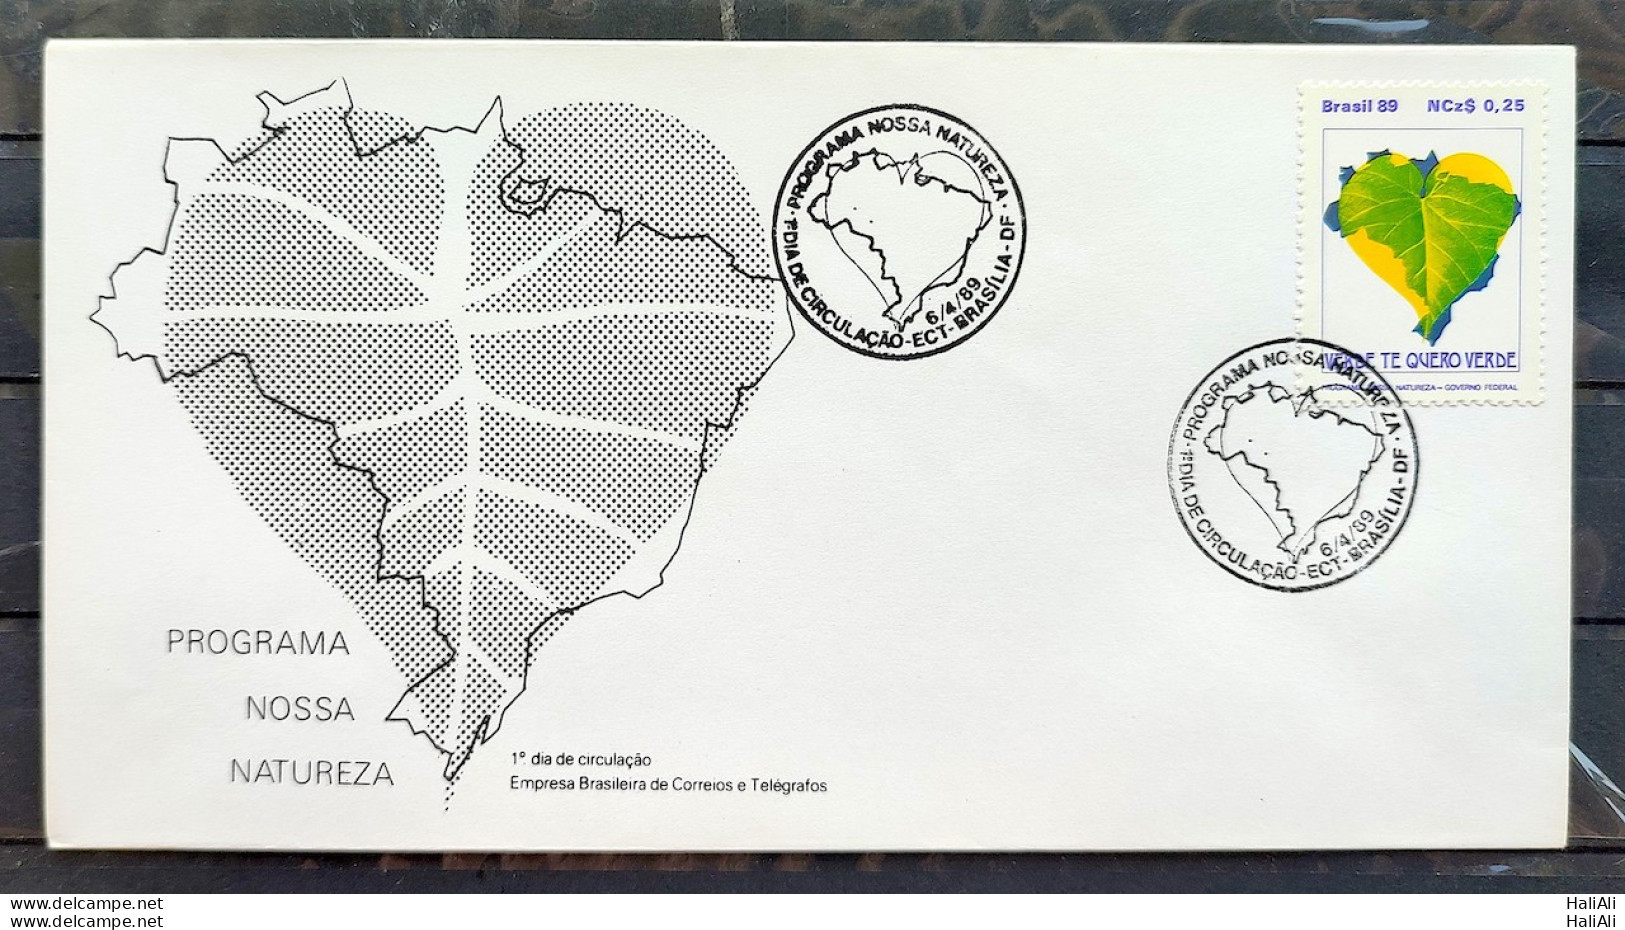 Brazil Envelope FDC 466 1989 Our Nature Map Program Environment CBC BSB 04 - Used Stamps